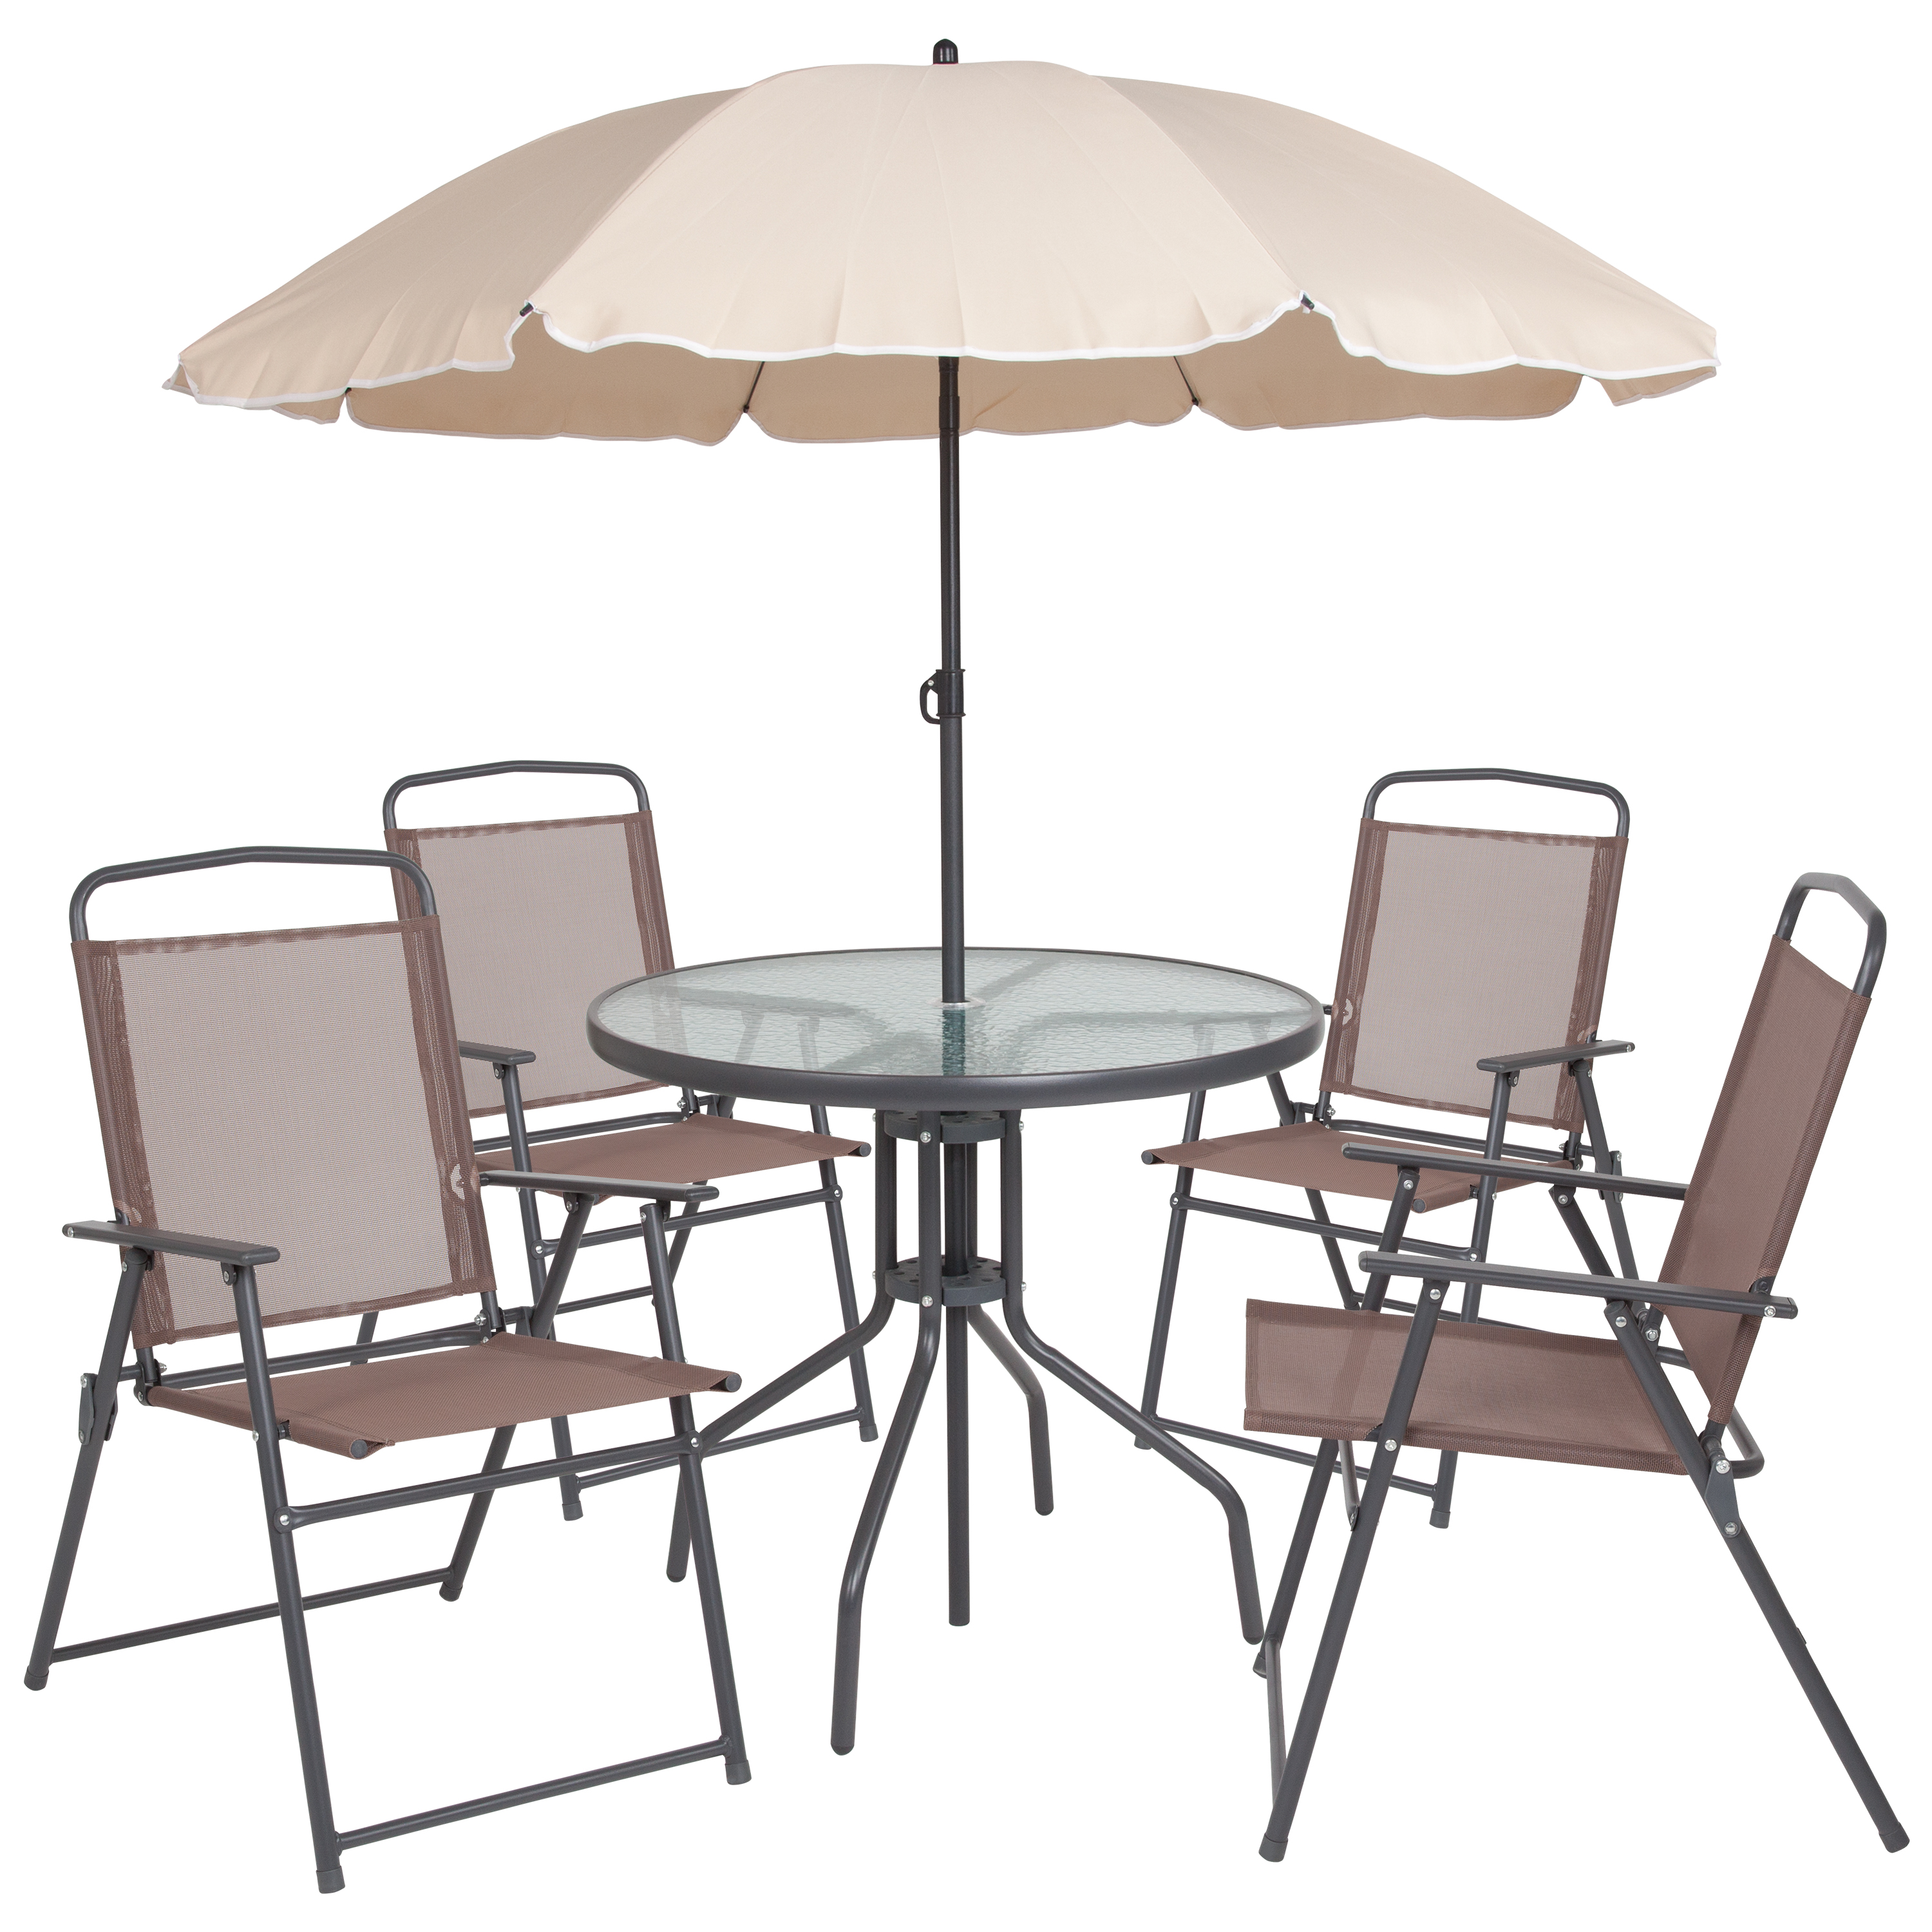 Flash Furniture Nantucket 6 Piece Brown Patio Garden Set with Umbrella Table and Set of 4 Folding Chairs - image 1 of 12